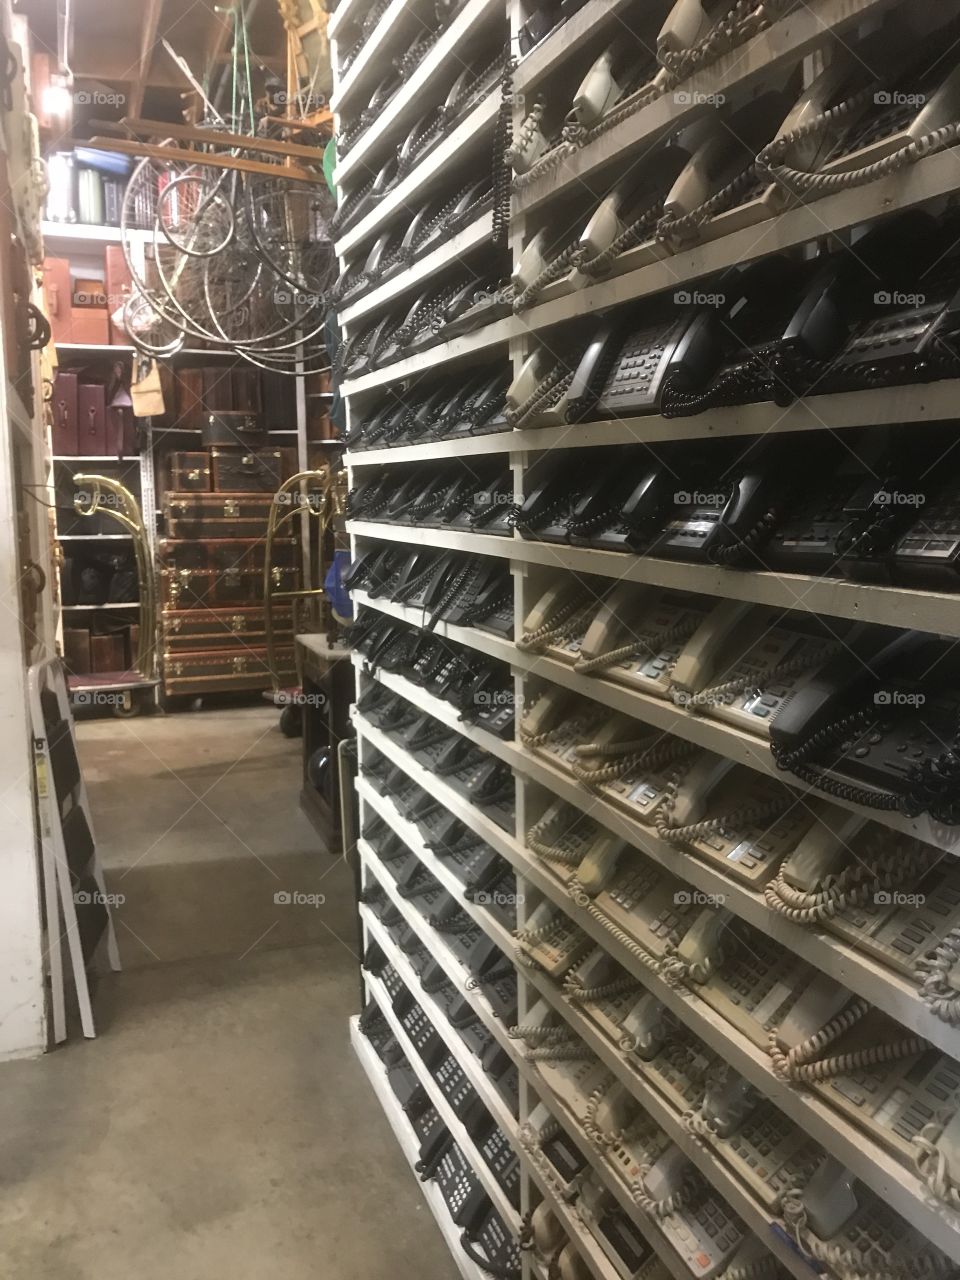 High shelves filled with many types of telephones displayed as a collection at a prop house